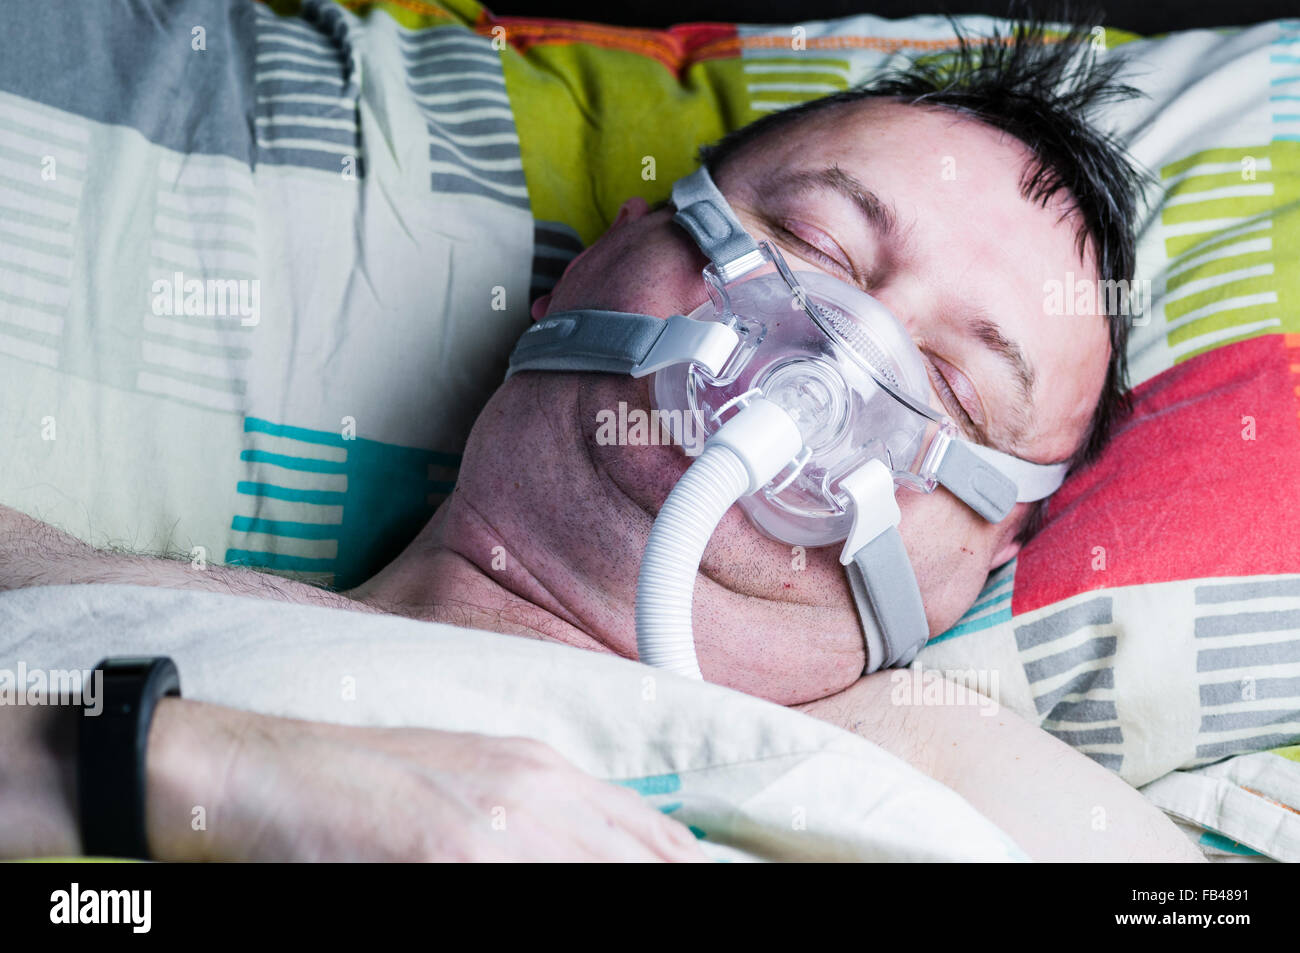 A middle-aged, overweight man wearing a CPAP mask while sleeping in bed Stock Photo